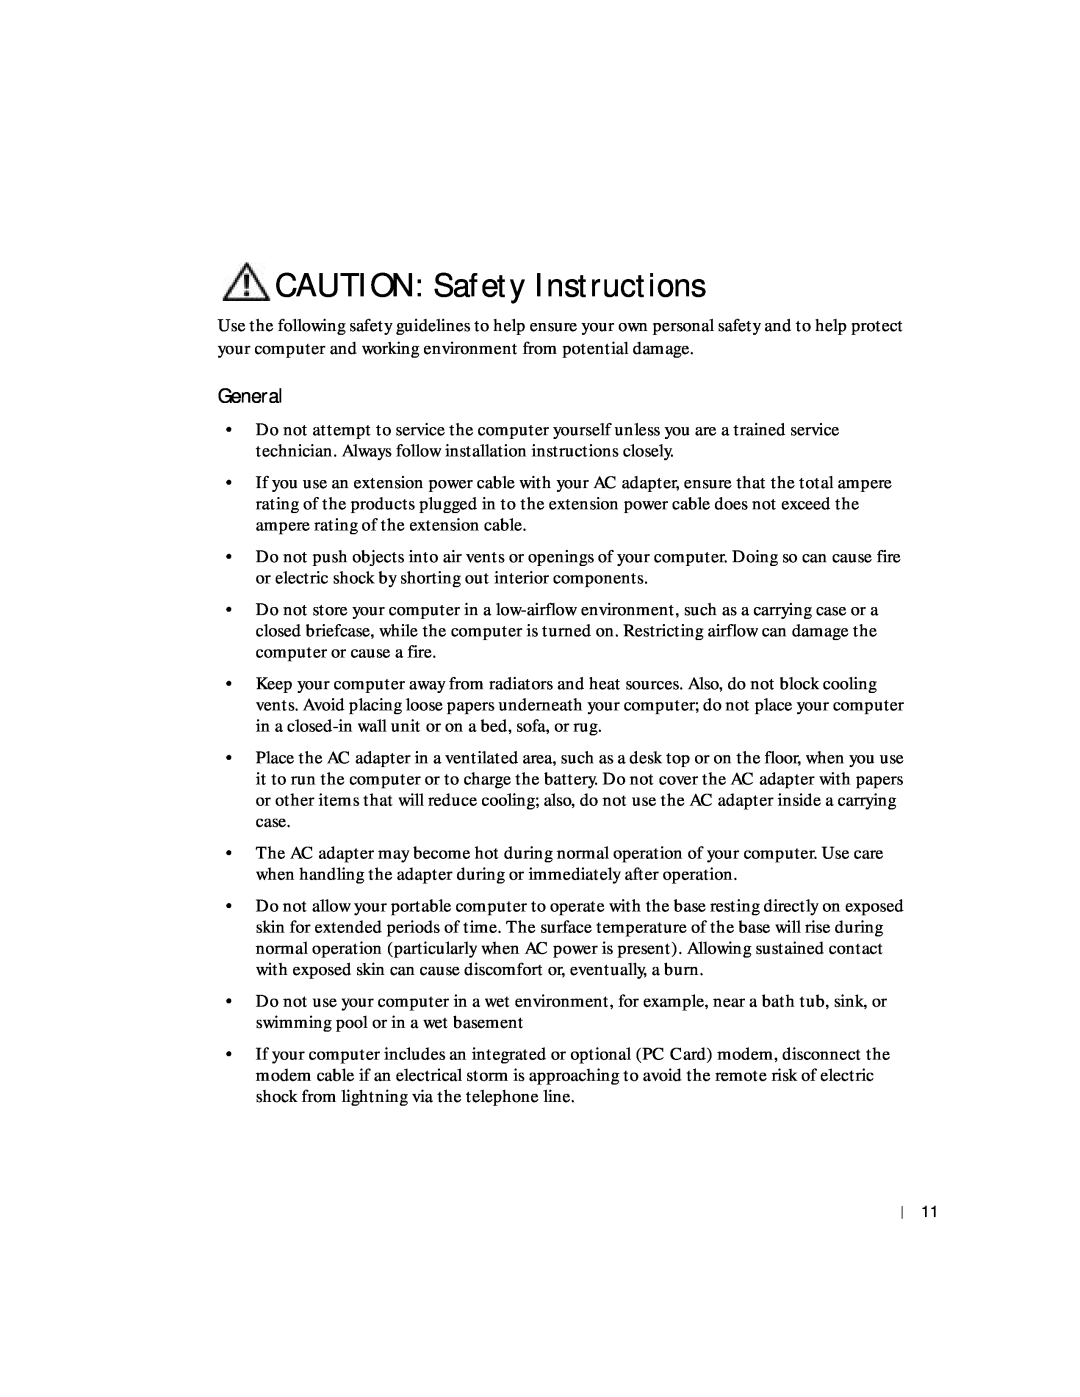 Dell 8600 manual CAUTION Safety Instructions, General 